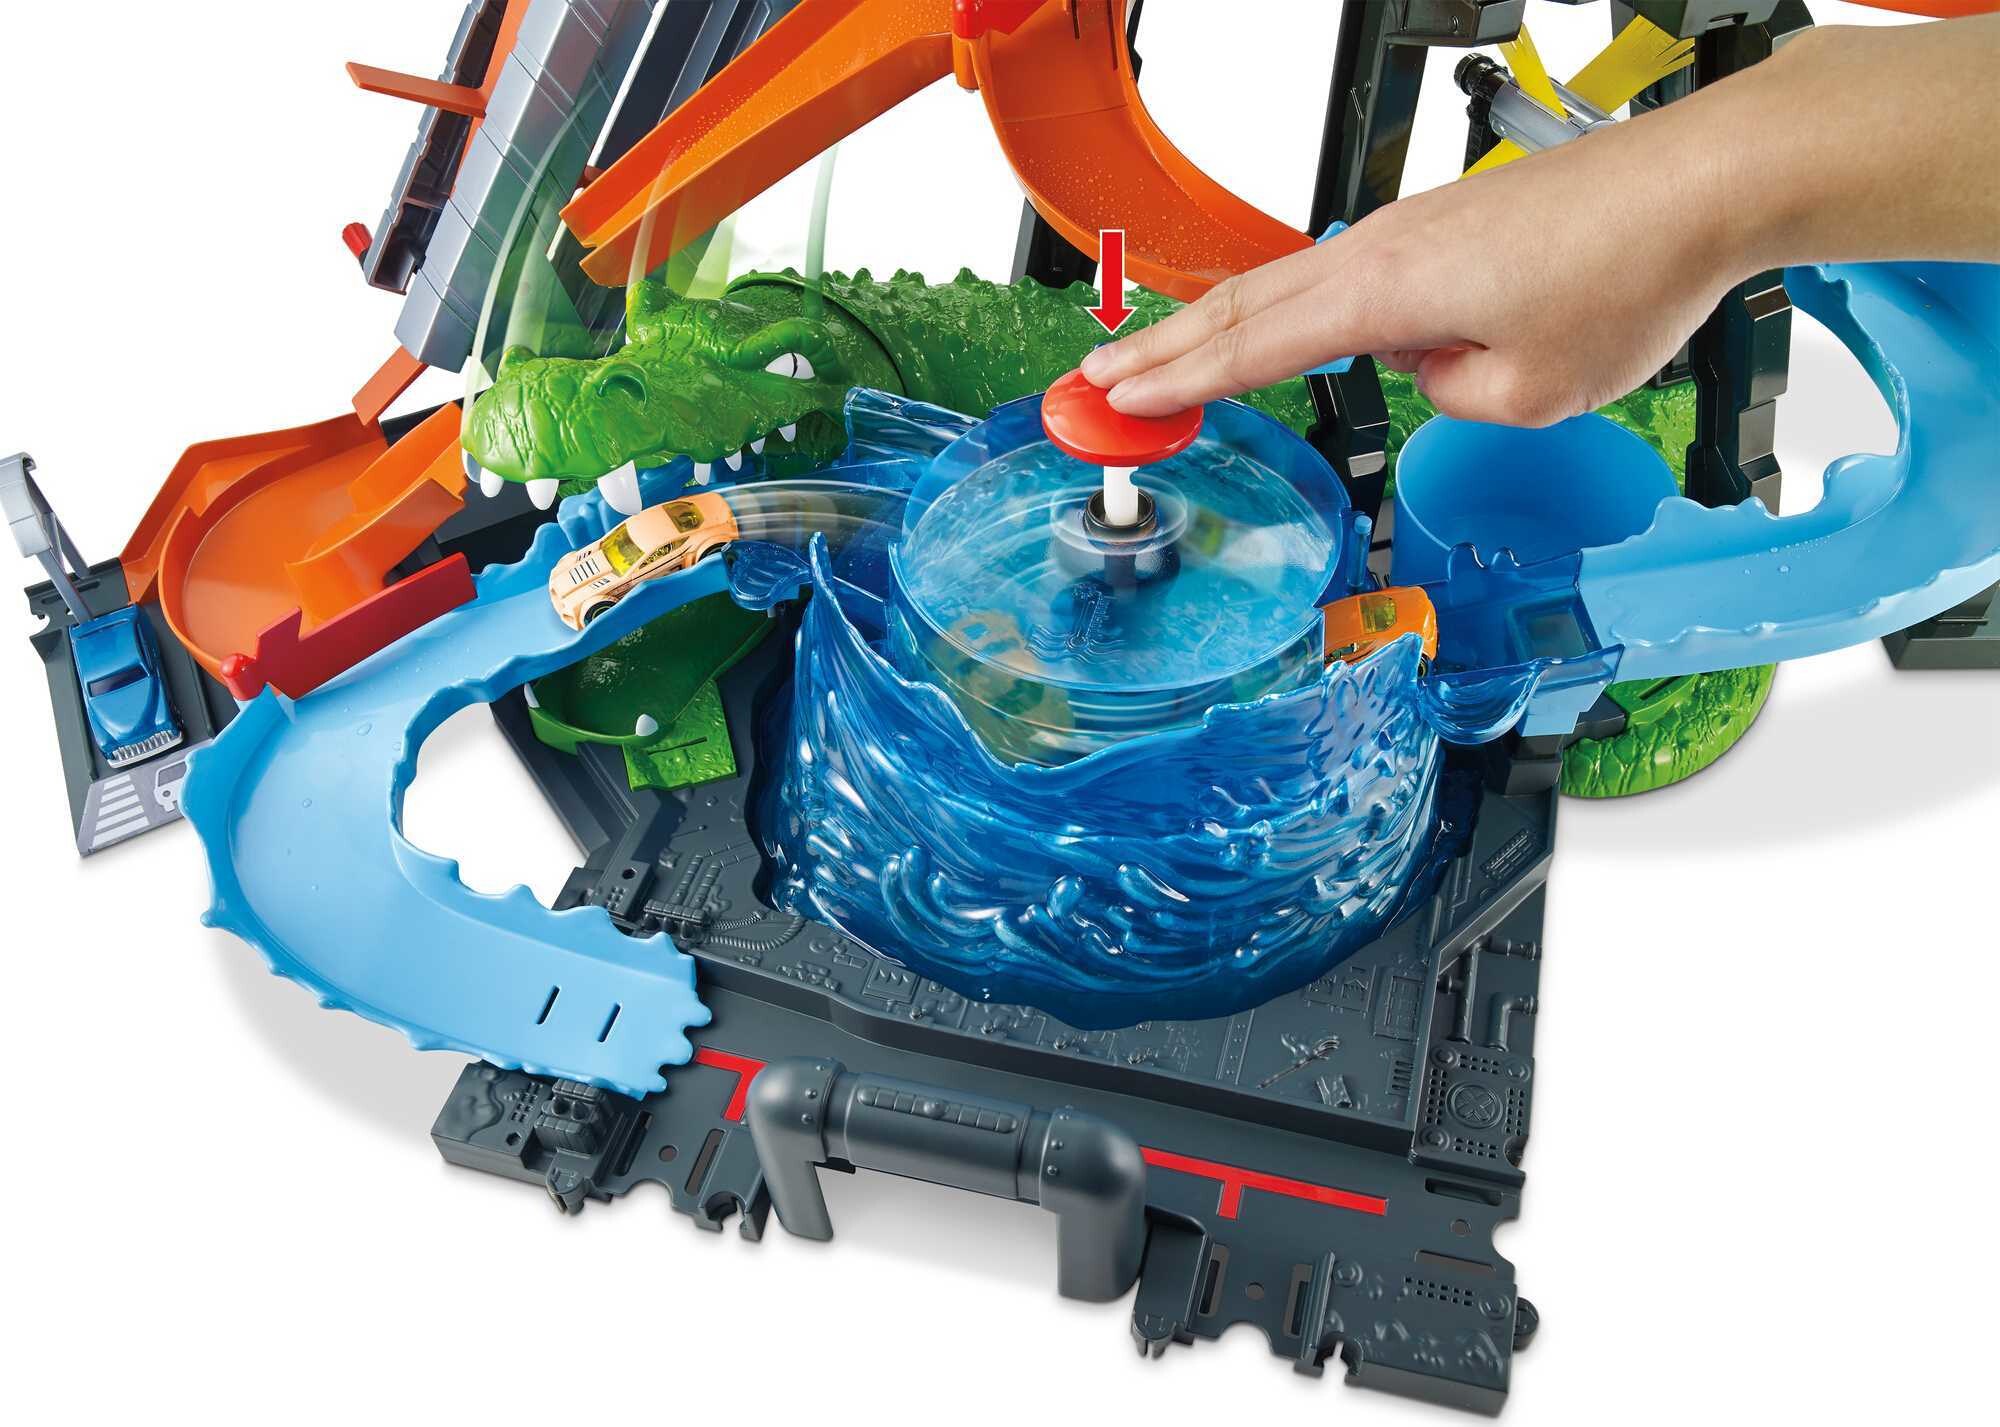 Hot Wheels Ultimate Gator Car Wash Playset with Color Shifters Toy Car in 1:64 Scale - image 4 of 7